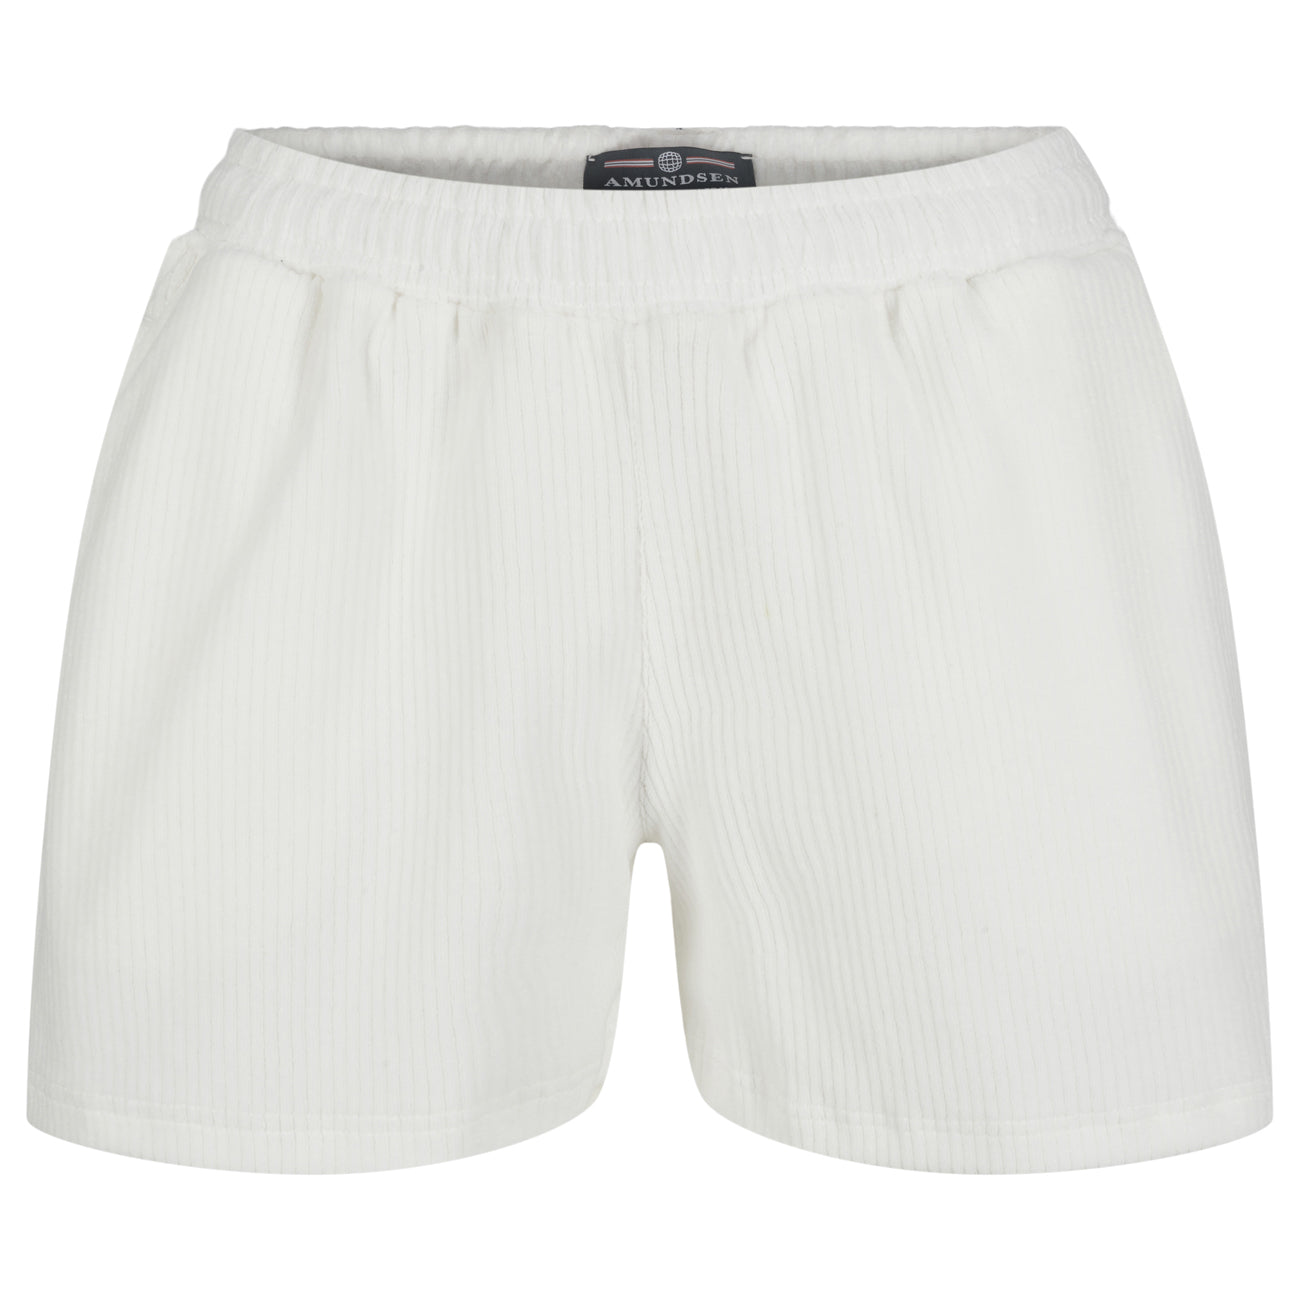 4 Incher Comfy Cord Shorts Womens - White